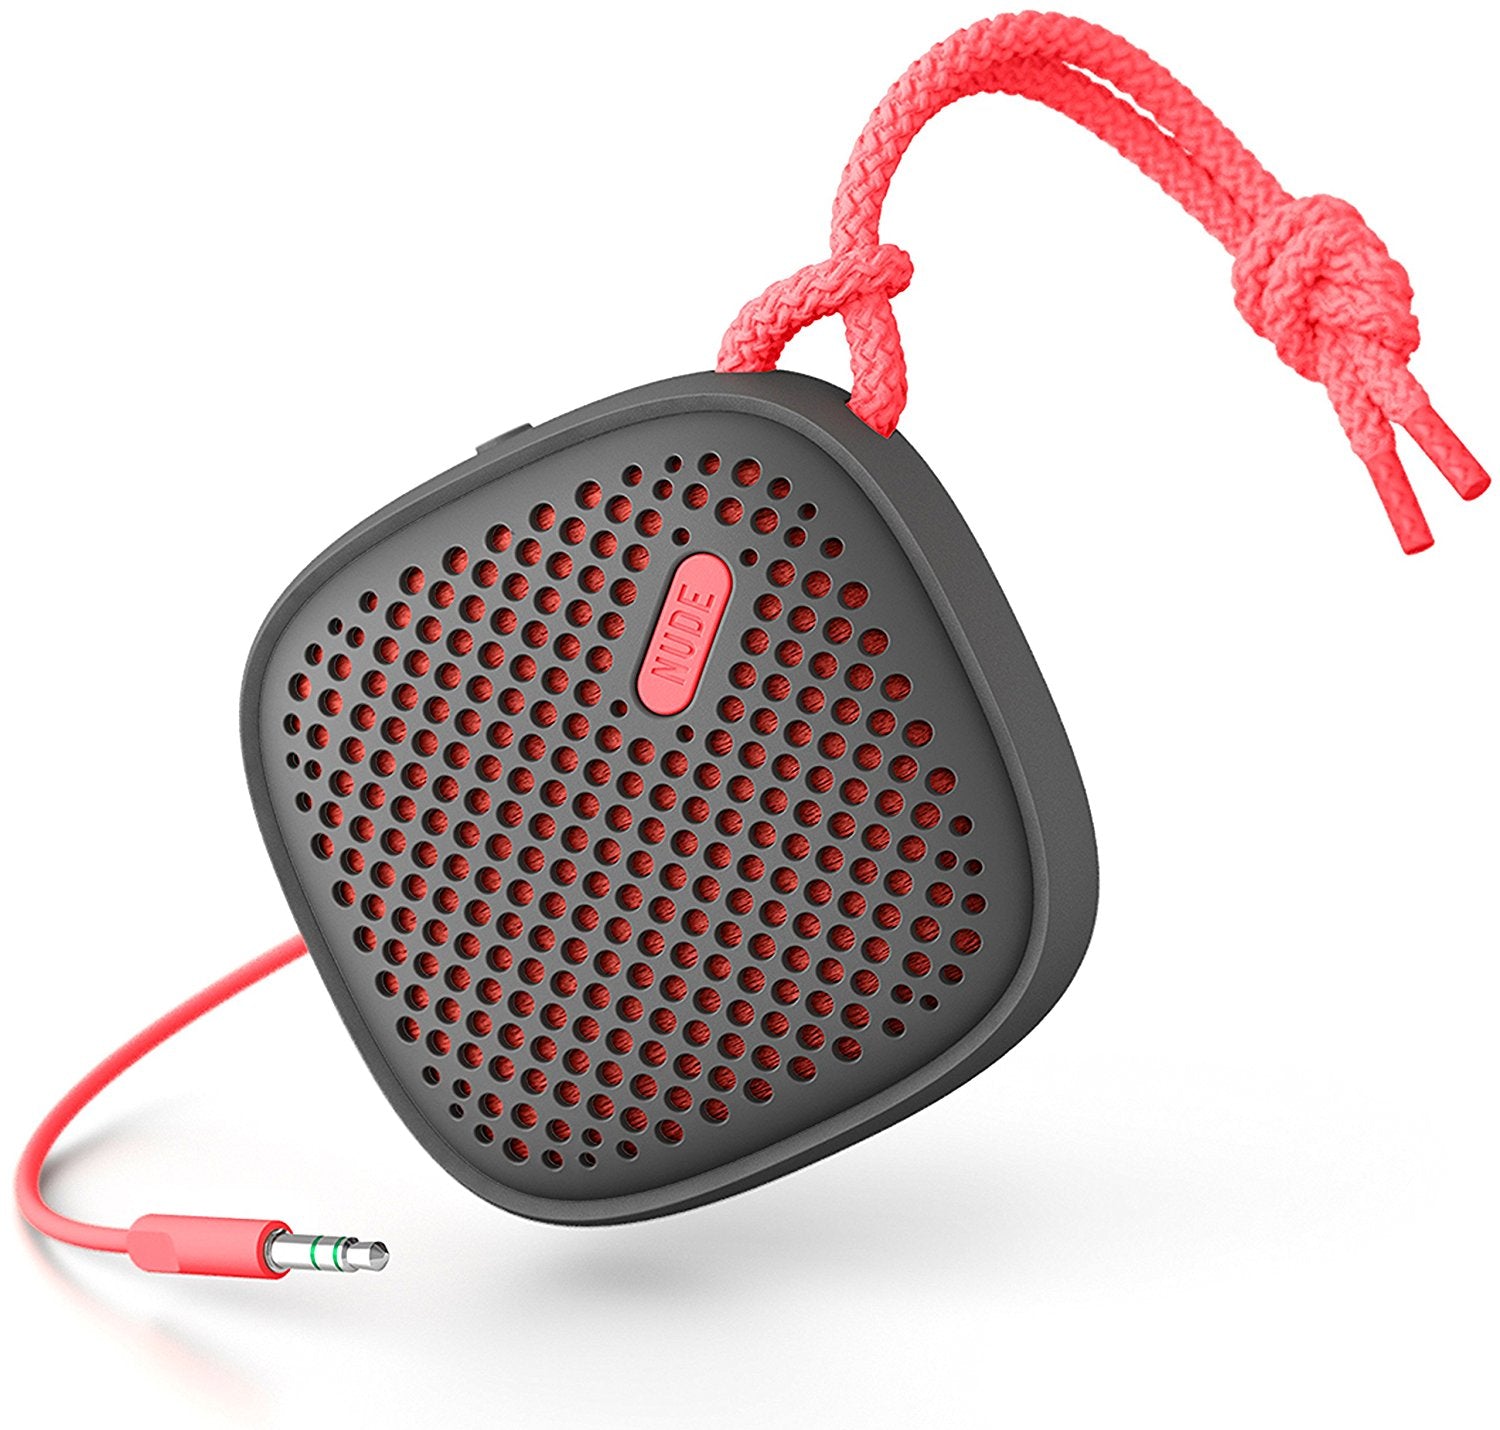 NudeAudio Move S Portable 3.5mm Universal Wired Speaker - Charcoal/Coral